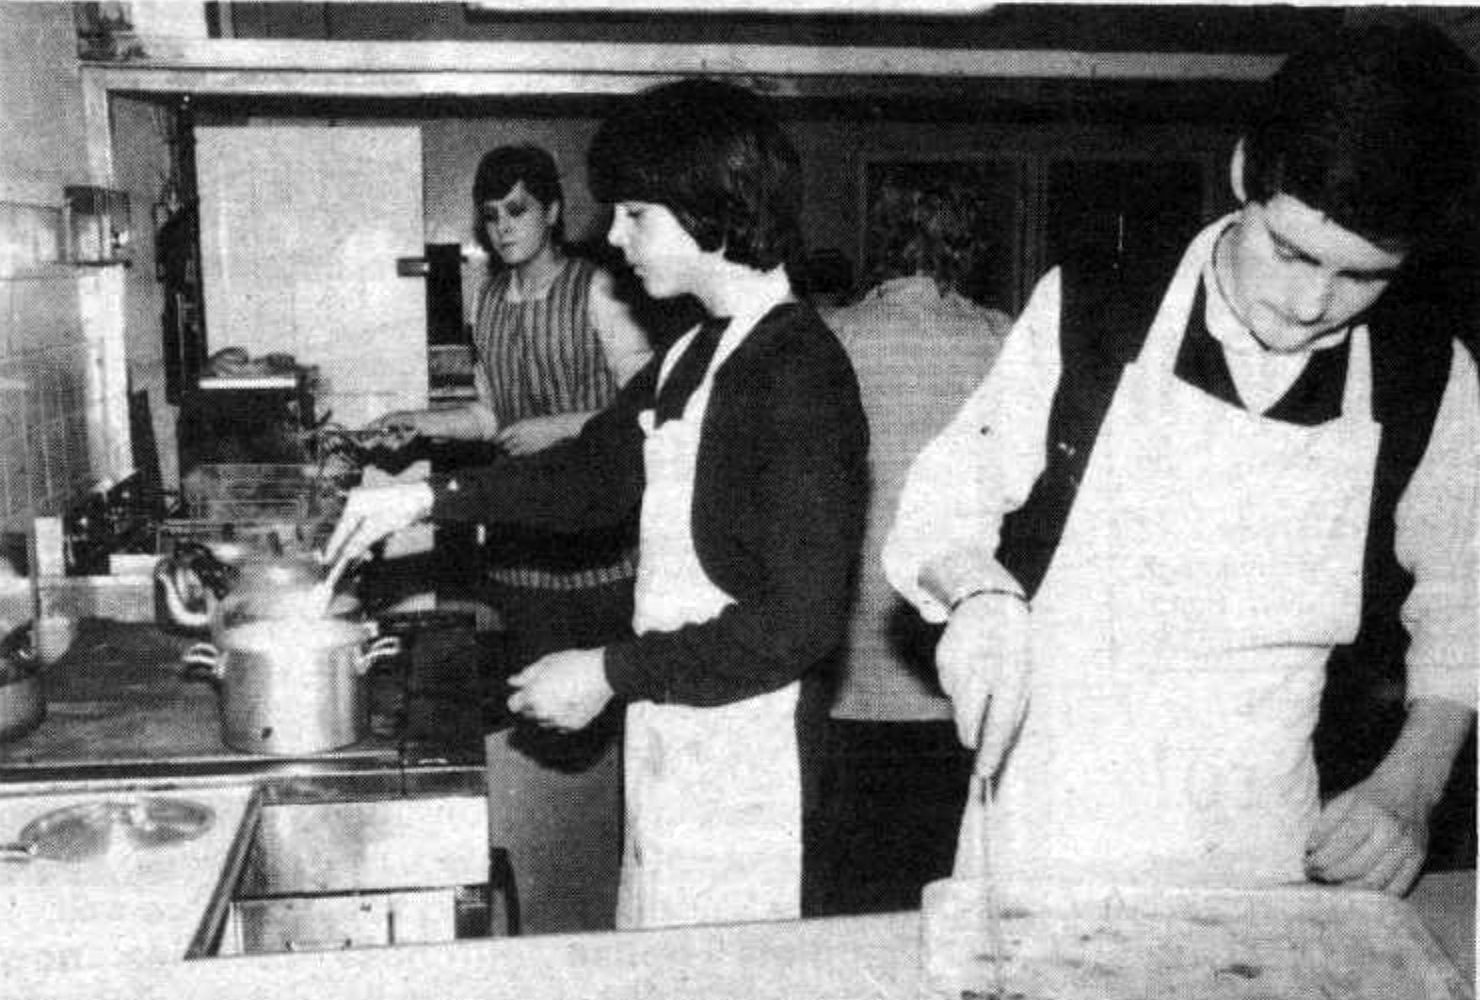 TRAINING: Working in the kitchen at Colinbrook Workshop in Lenadoon in March 1983